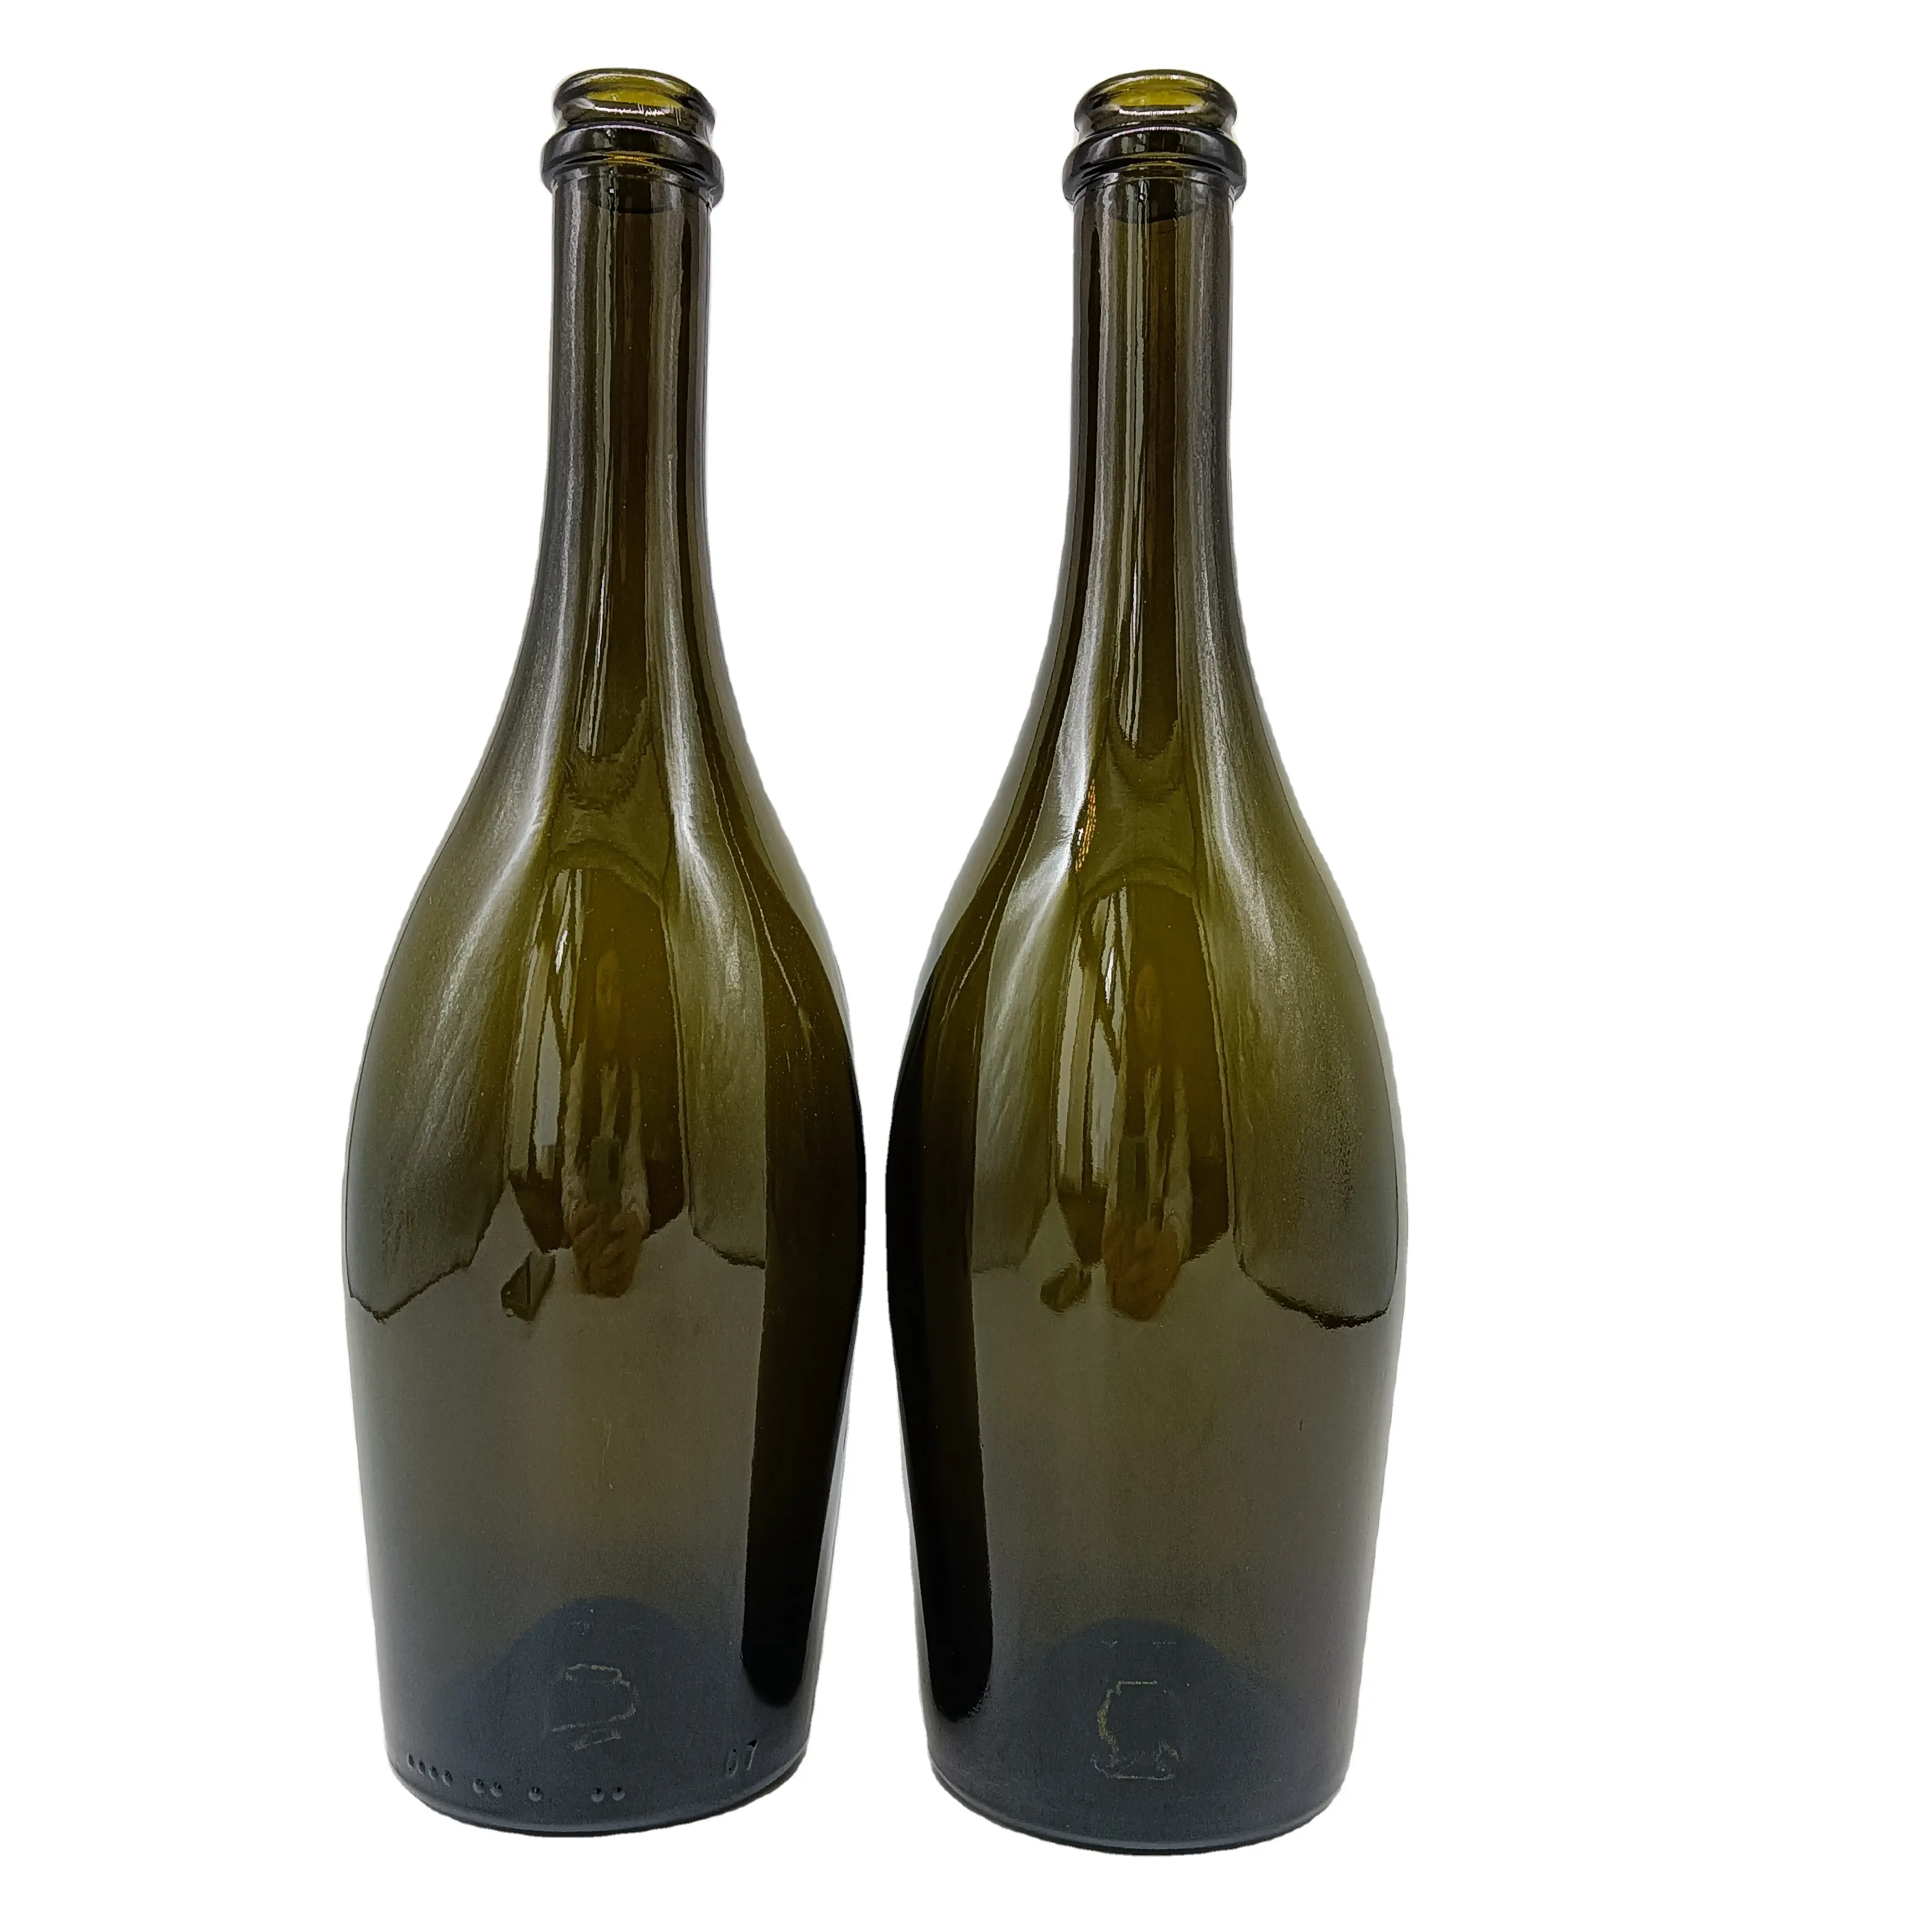 750 Ml 1000 Ml Champagne Glass Bottle Brown Green Color Manufacture Wholesale Price